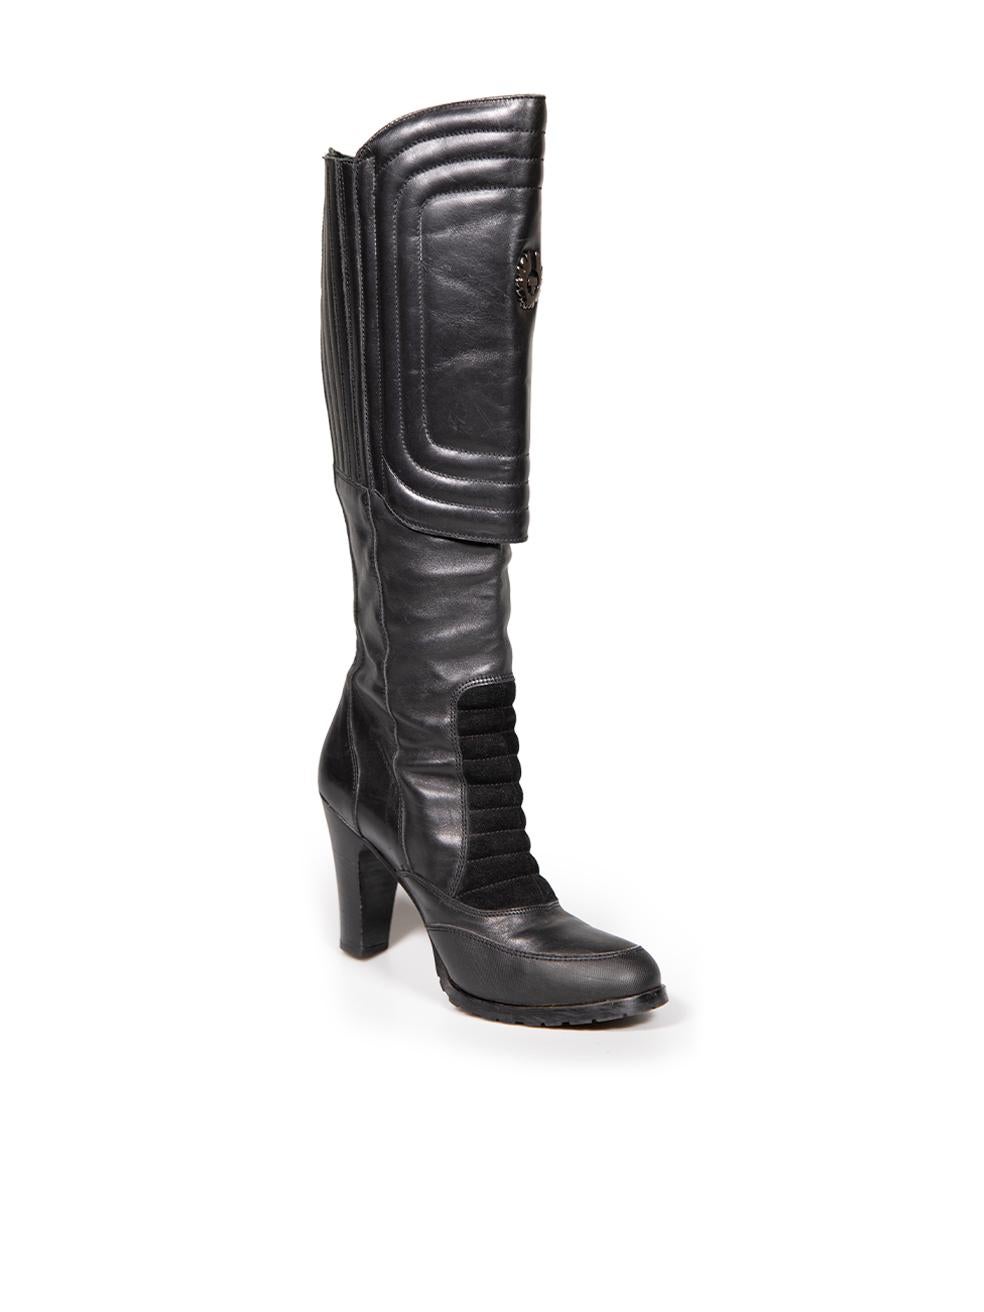 CONDITION is Very good. Minimal wear to boots is evident. Minimal scratches to both wooden heel and rubber detail on right shoe. Indents on the back heel of left shoe on this used Belstaff designer resale item.
 
 Details
 Black
 Leather
 Knee high